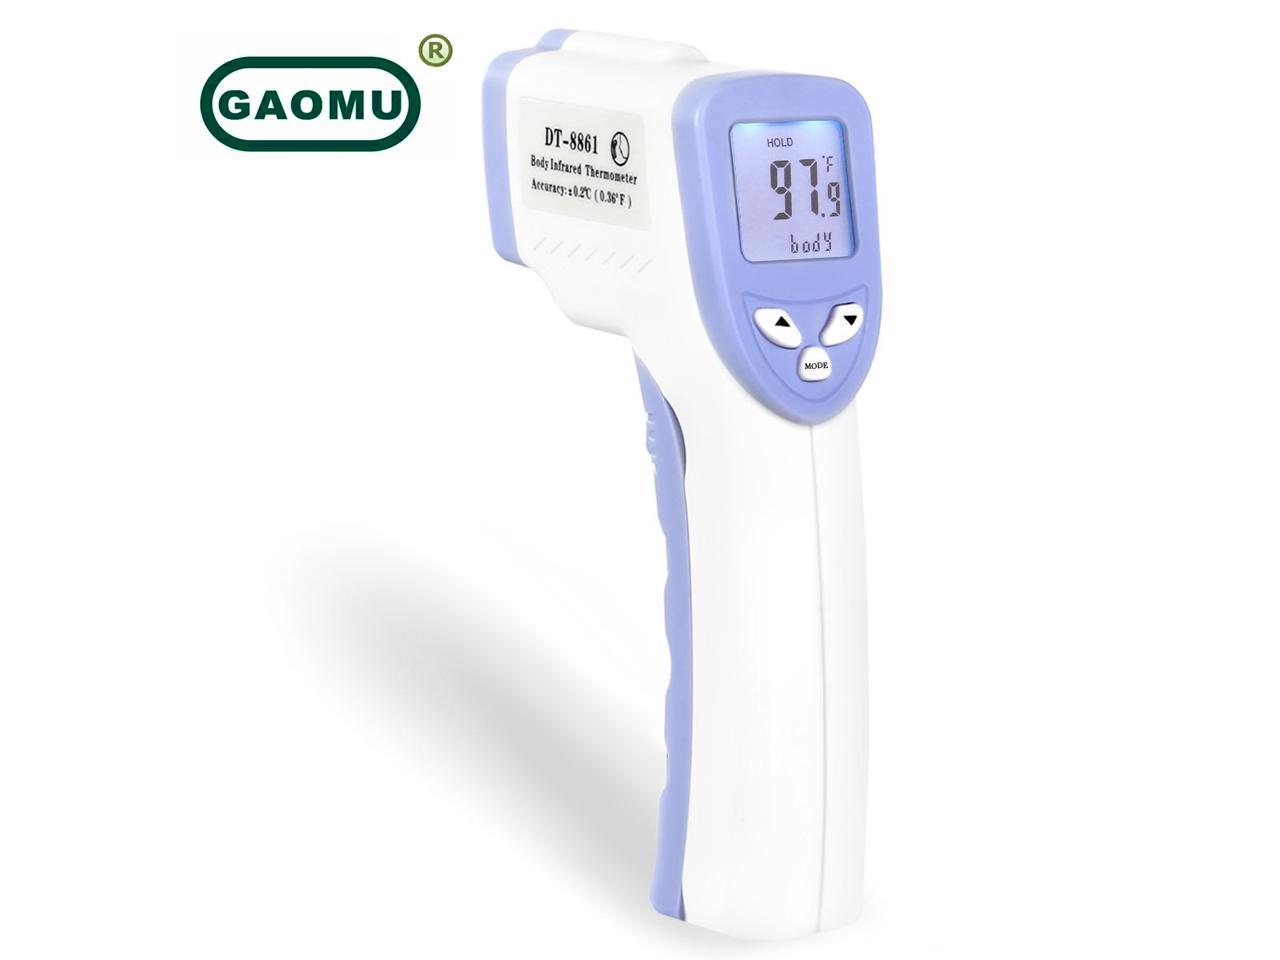 Leoboone Non-Contact Body Infrared Forehead Digital Thermometer Instant Reading with Large LCD Display for Home Measurement Helper 